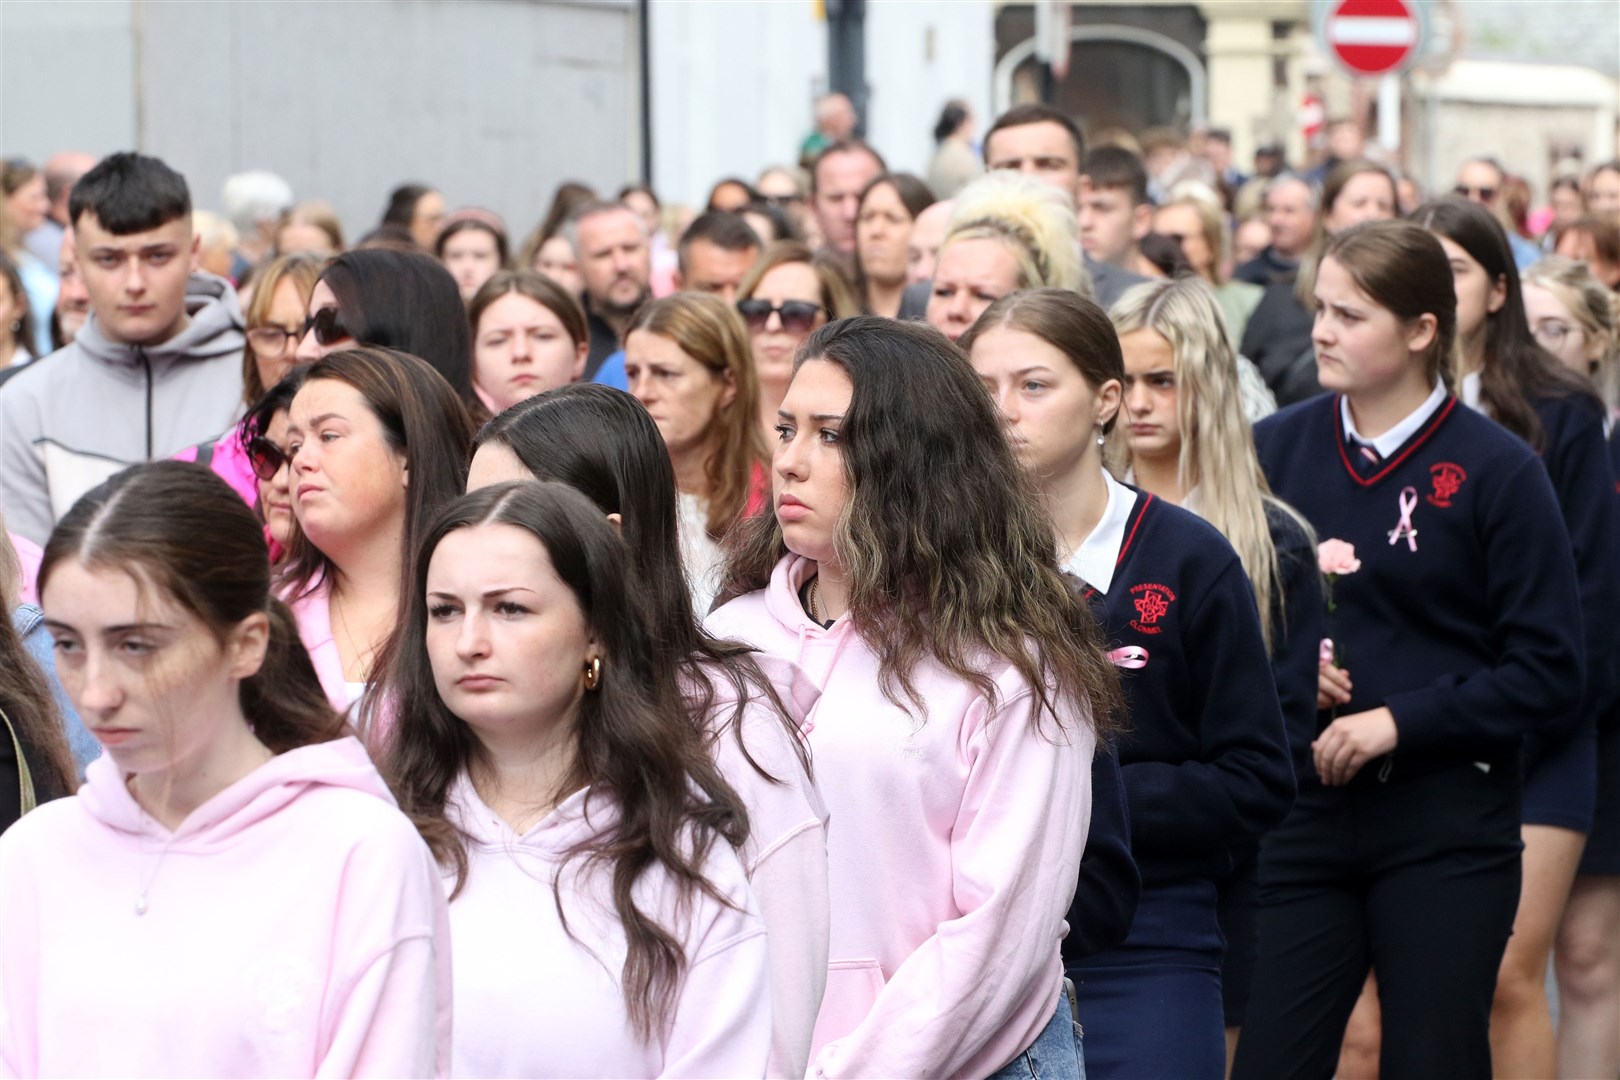 Many mourners at the funeral wore pink in memory of Zoey Coffey (Brendan Gleeson/PA)